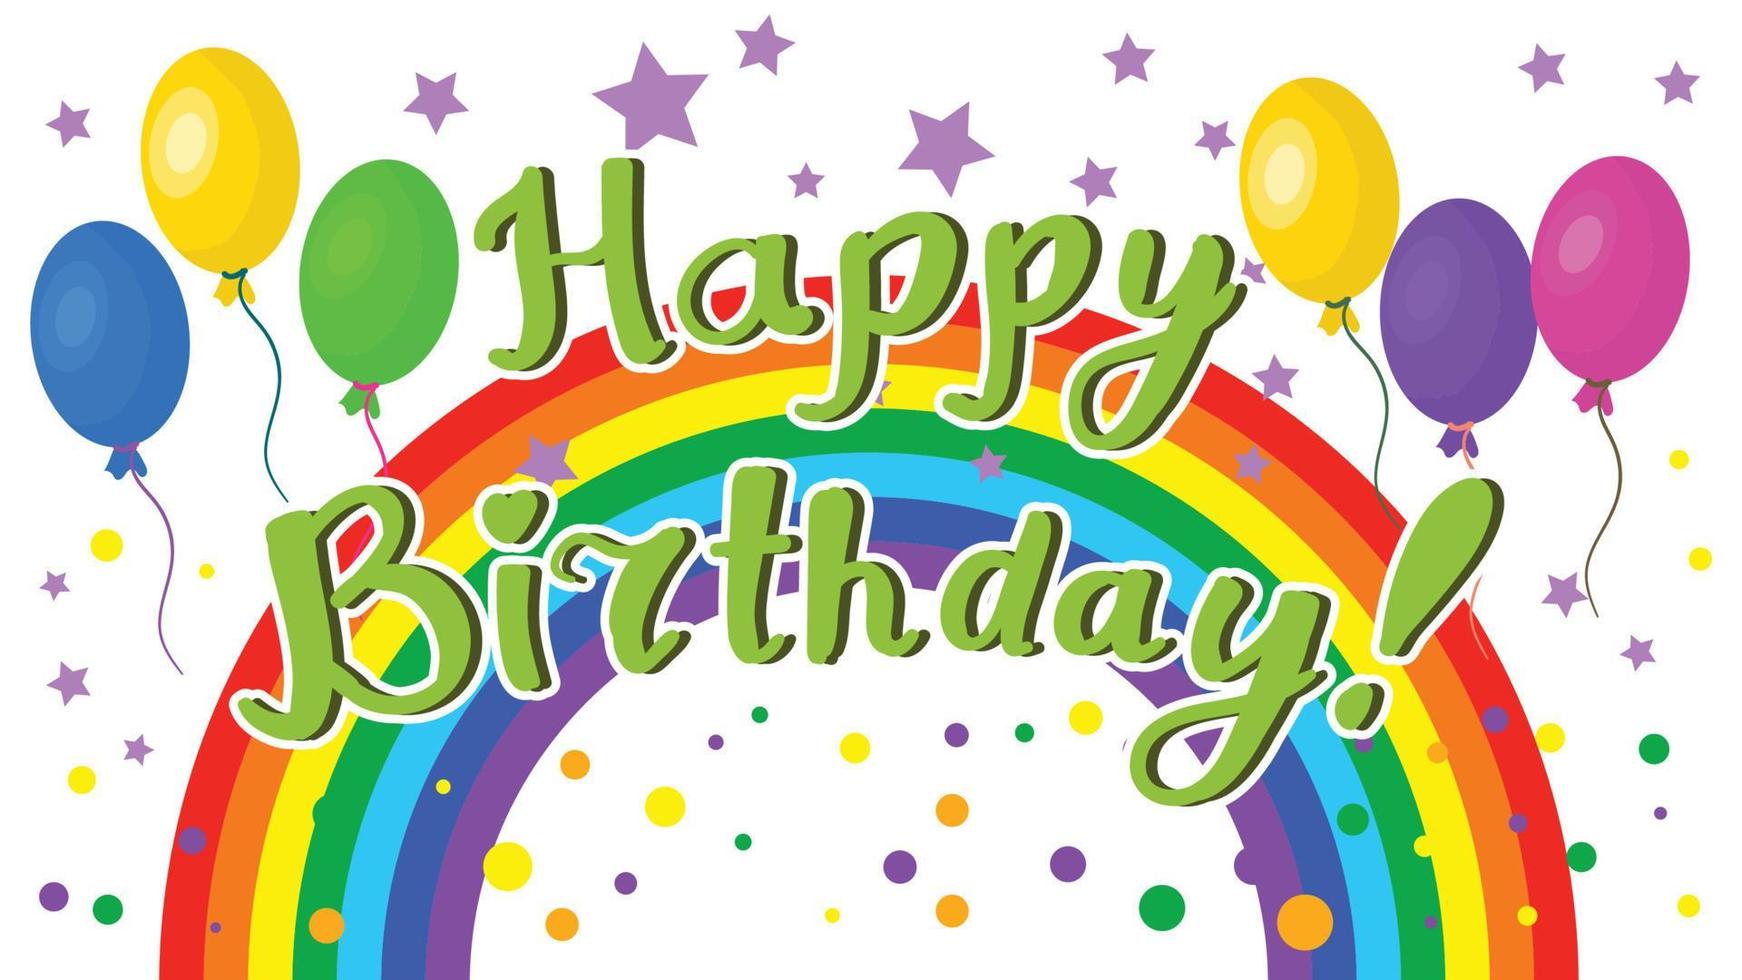 Cute Happy Birthday greeting card with lettering, balloons and rainbow isolated on white background. vector